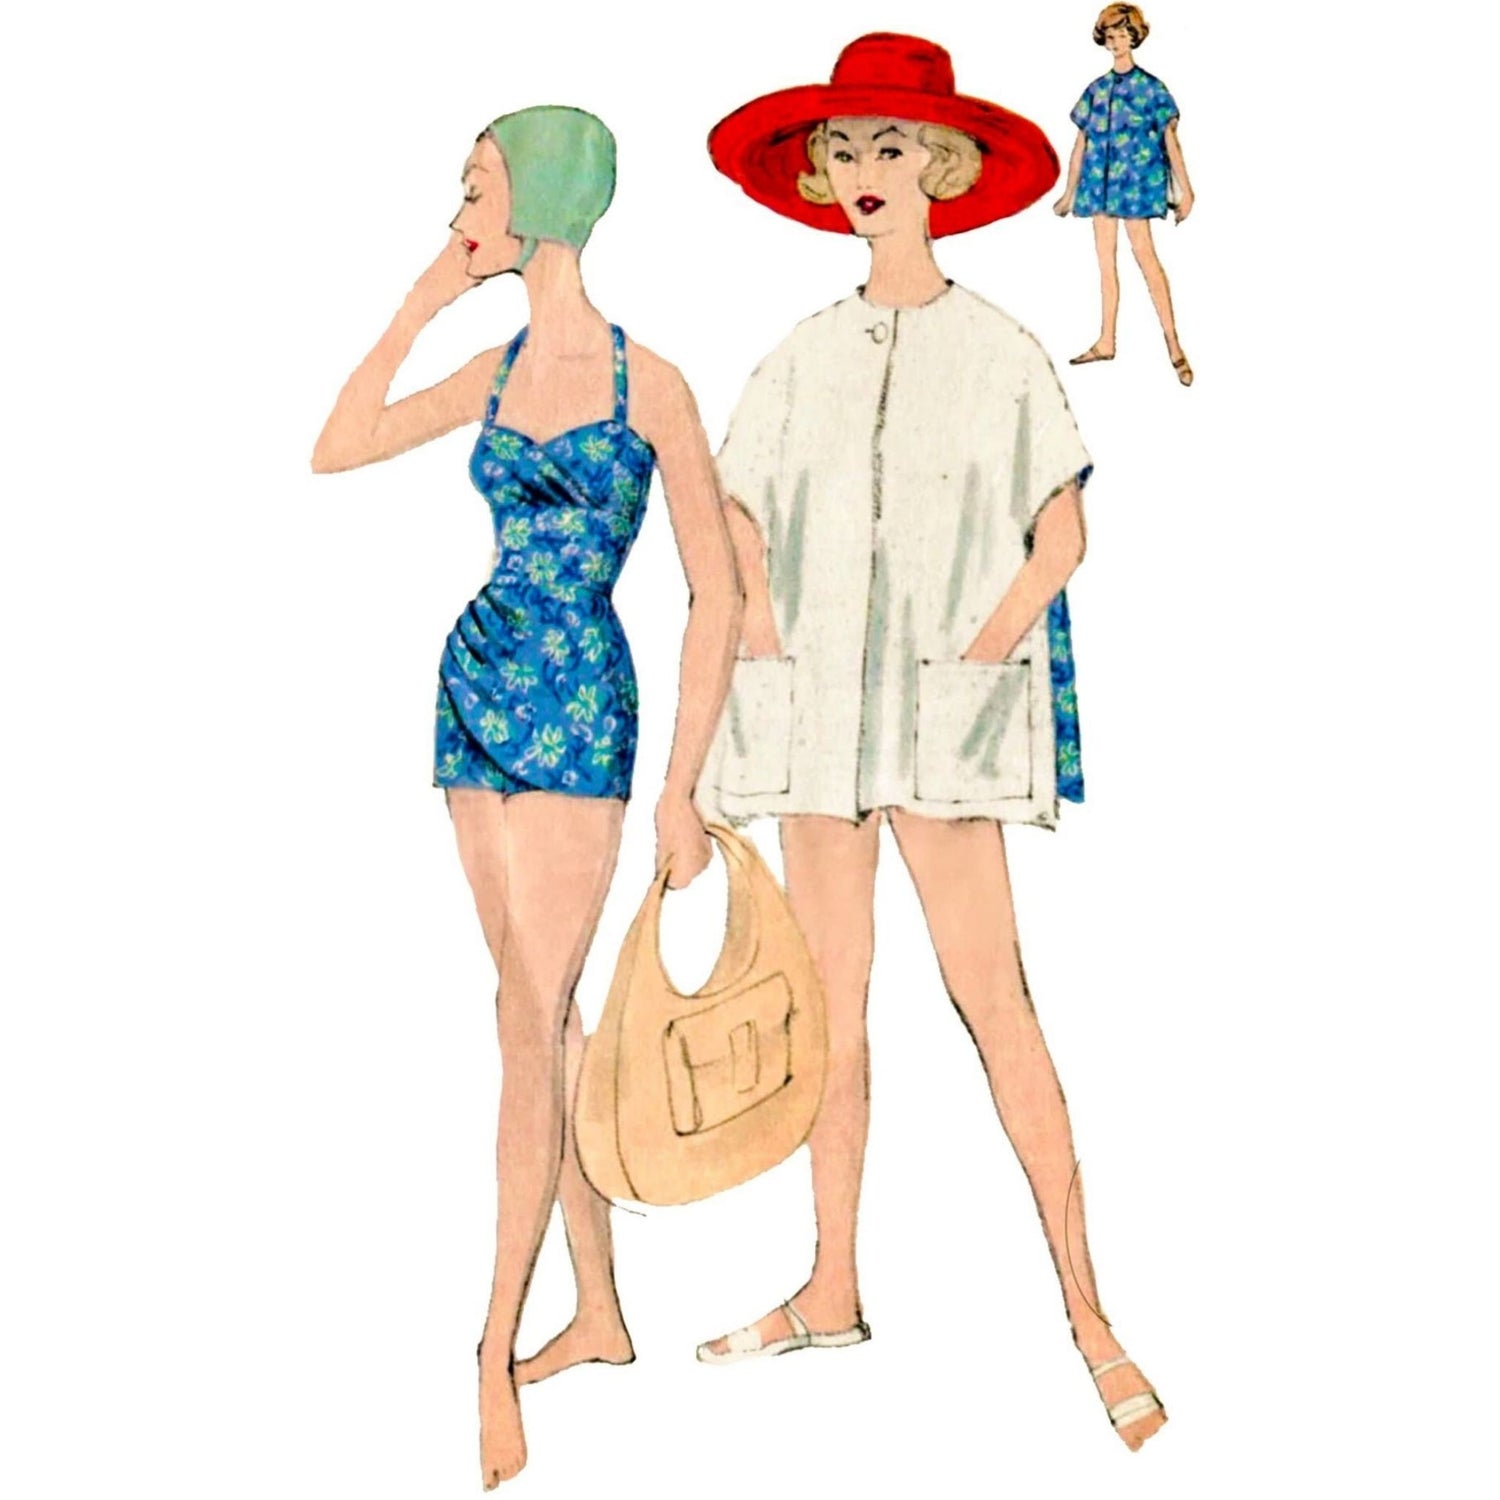 Model wearing bathing suit and reversible beach coat made from Vogue 9749 pattern